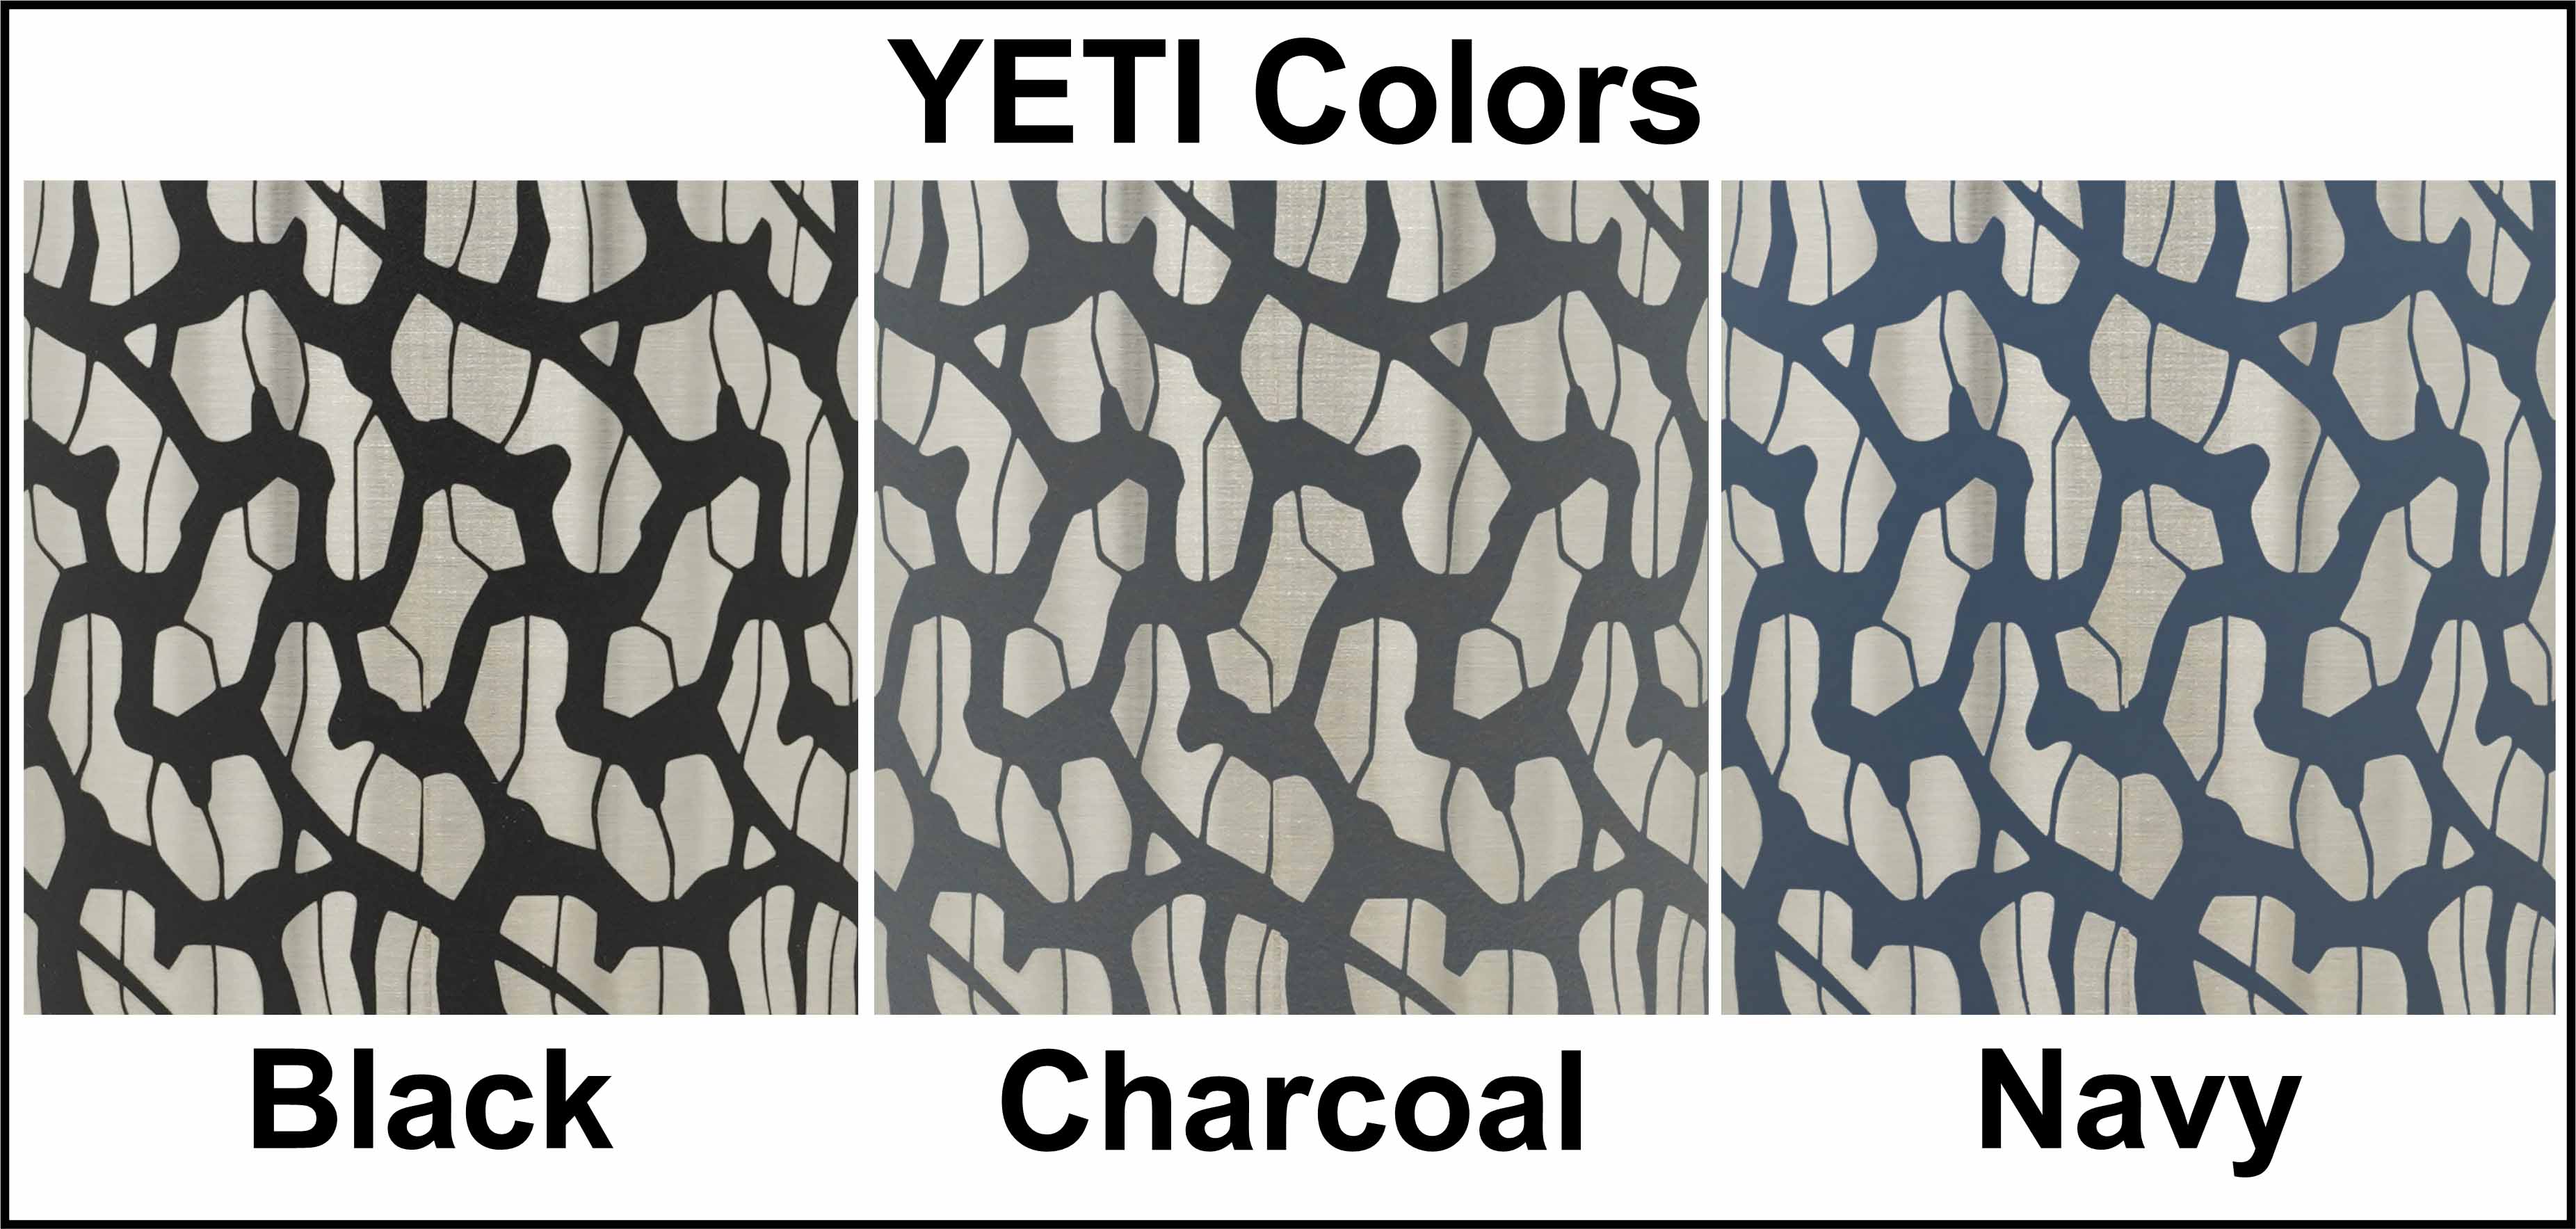 Laser engraved tire track pattern shown in each Yeti tumbler color.